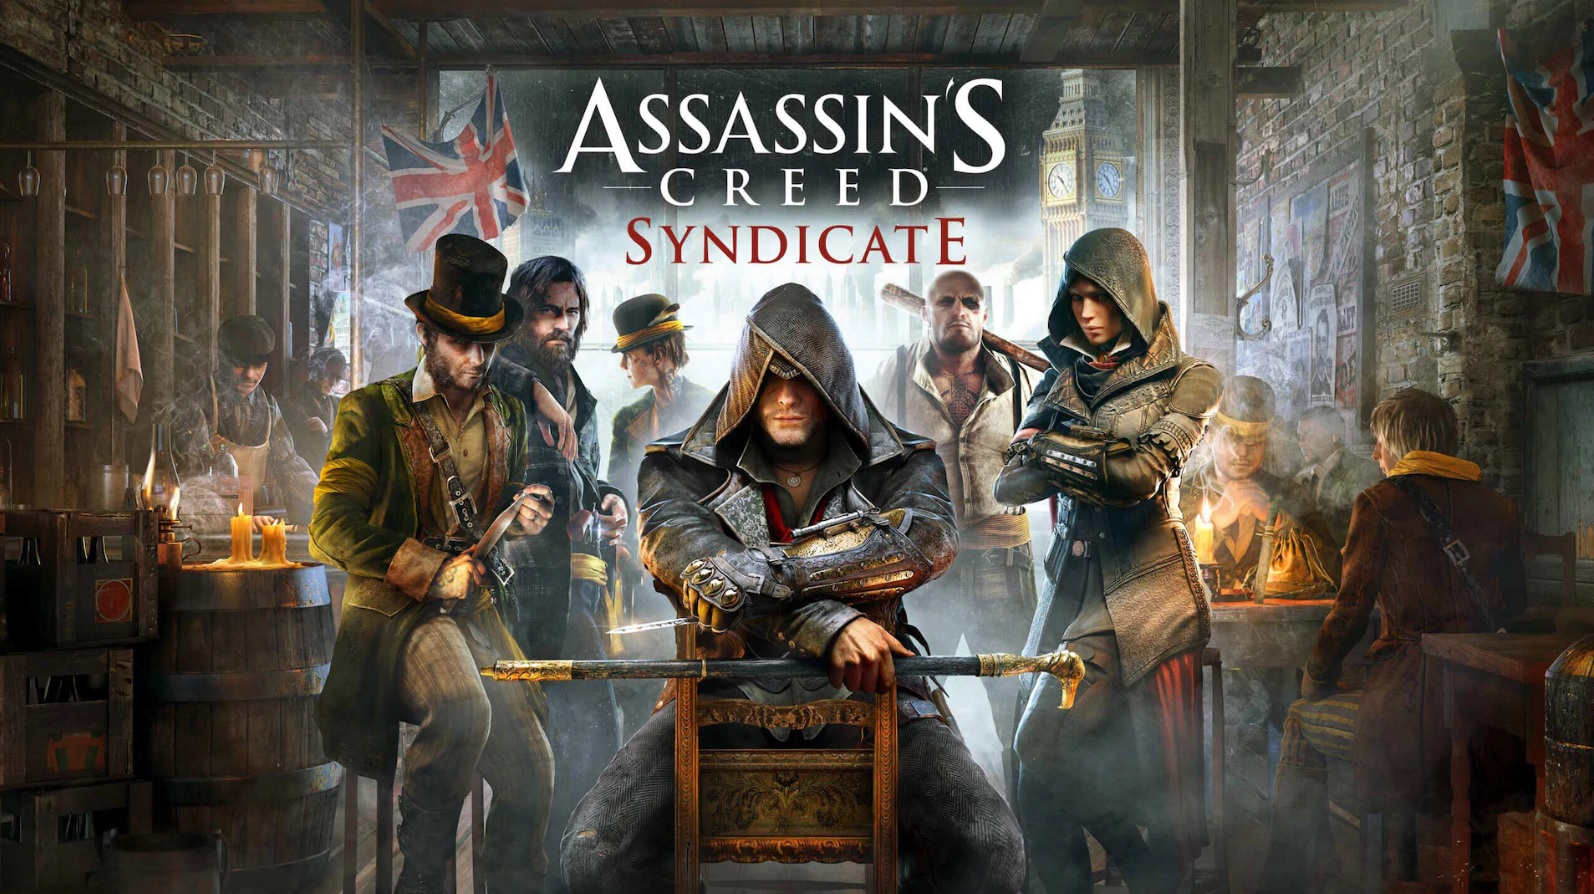 Assassin's Creed Syndicate (Oyun İncelemesi) | Assassins Creed Syndicate